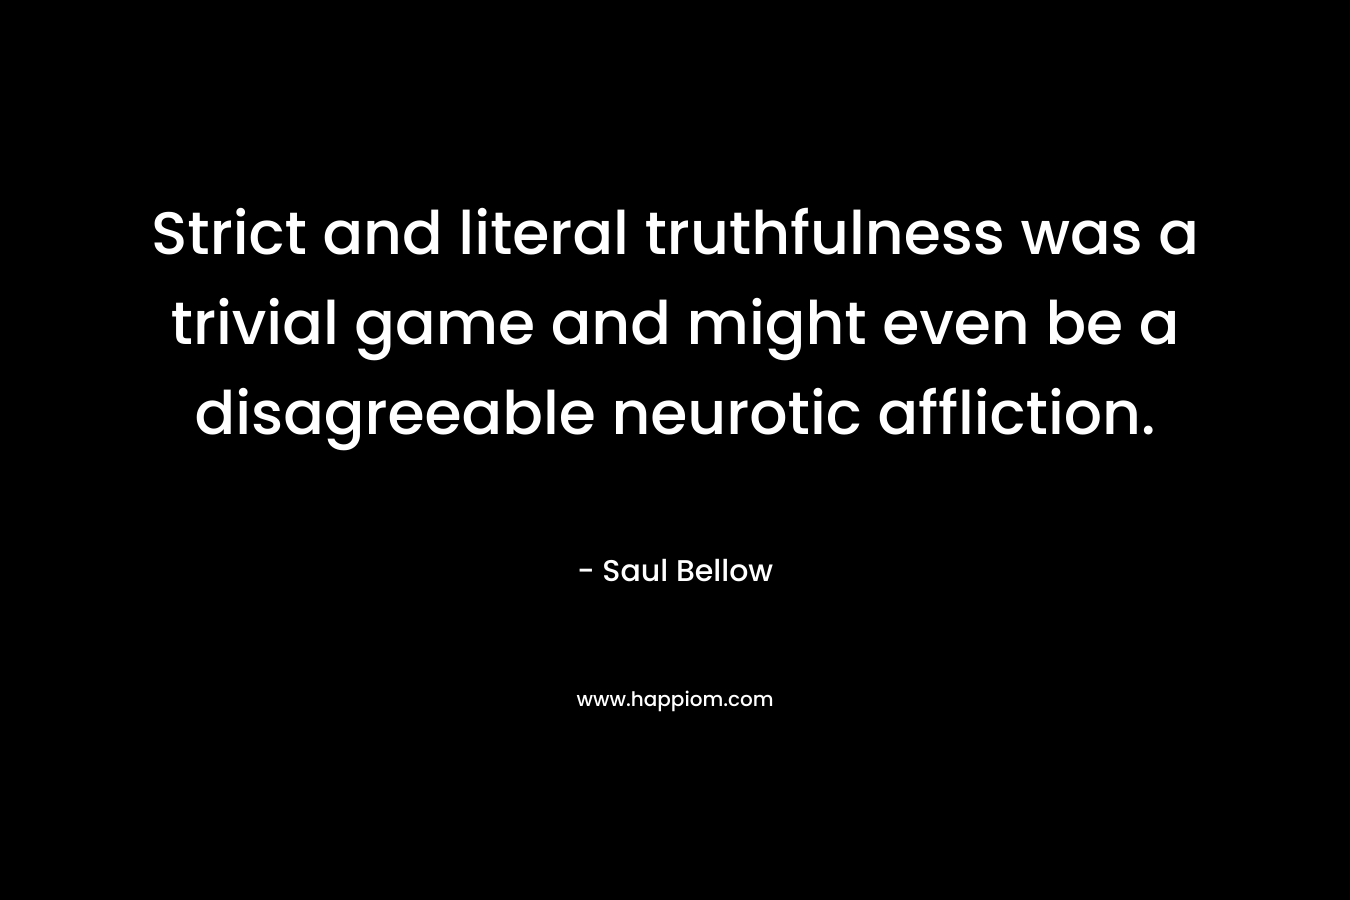 Strict and literal truthfulness was a trivial game and might even be a disagreeable neurotic affliction.